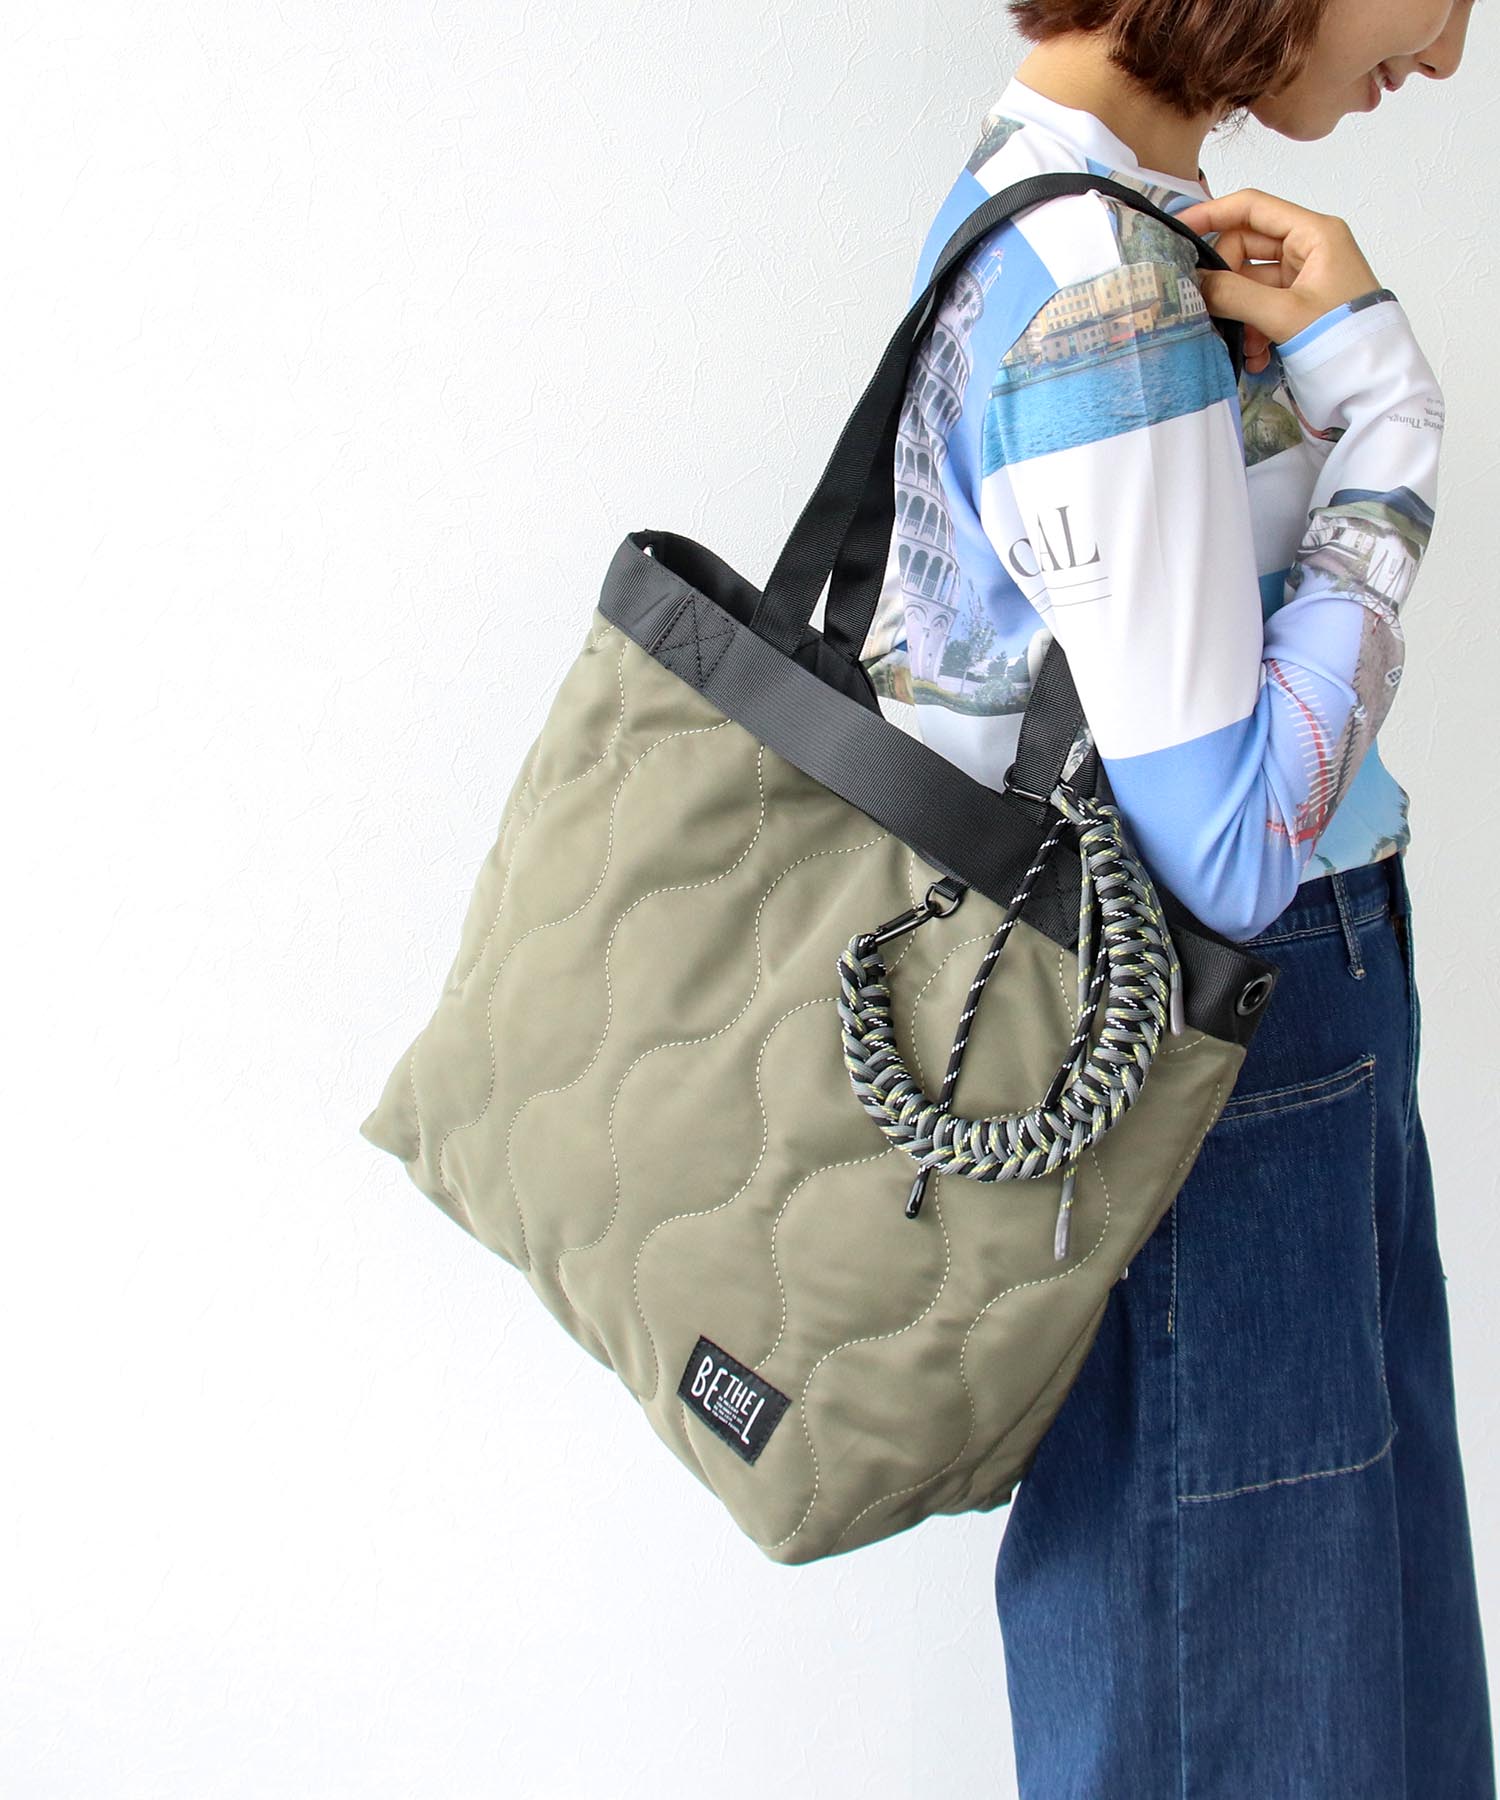 BETHEL】2-IN-1 TOTE BAG | AND ON JIONE STORE（アンドオン）ジオン